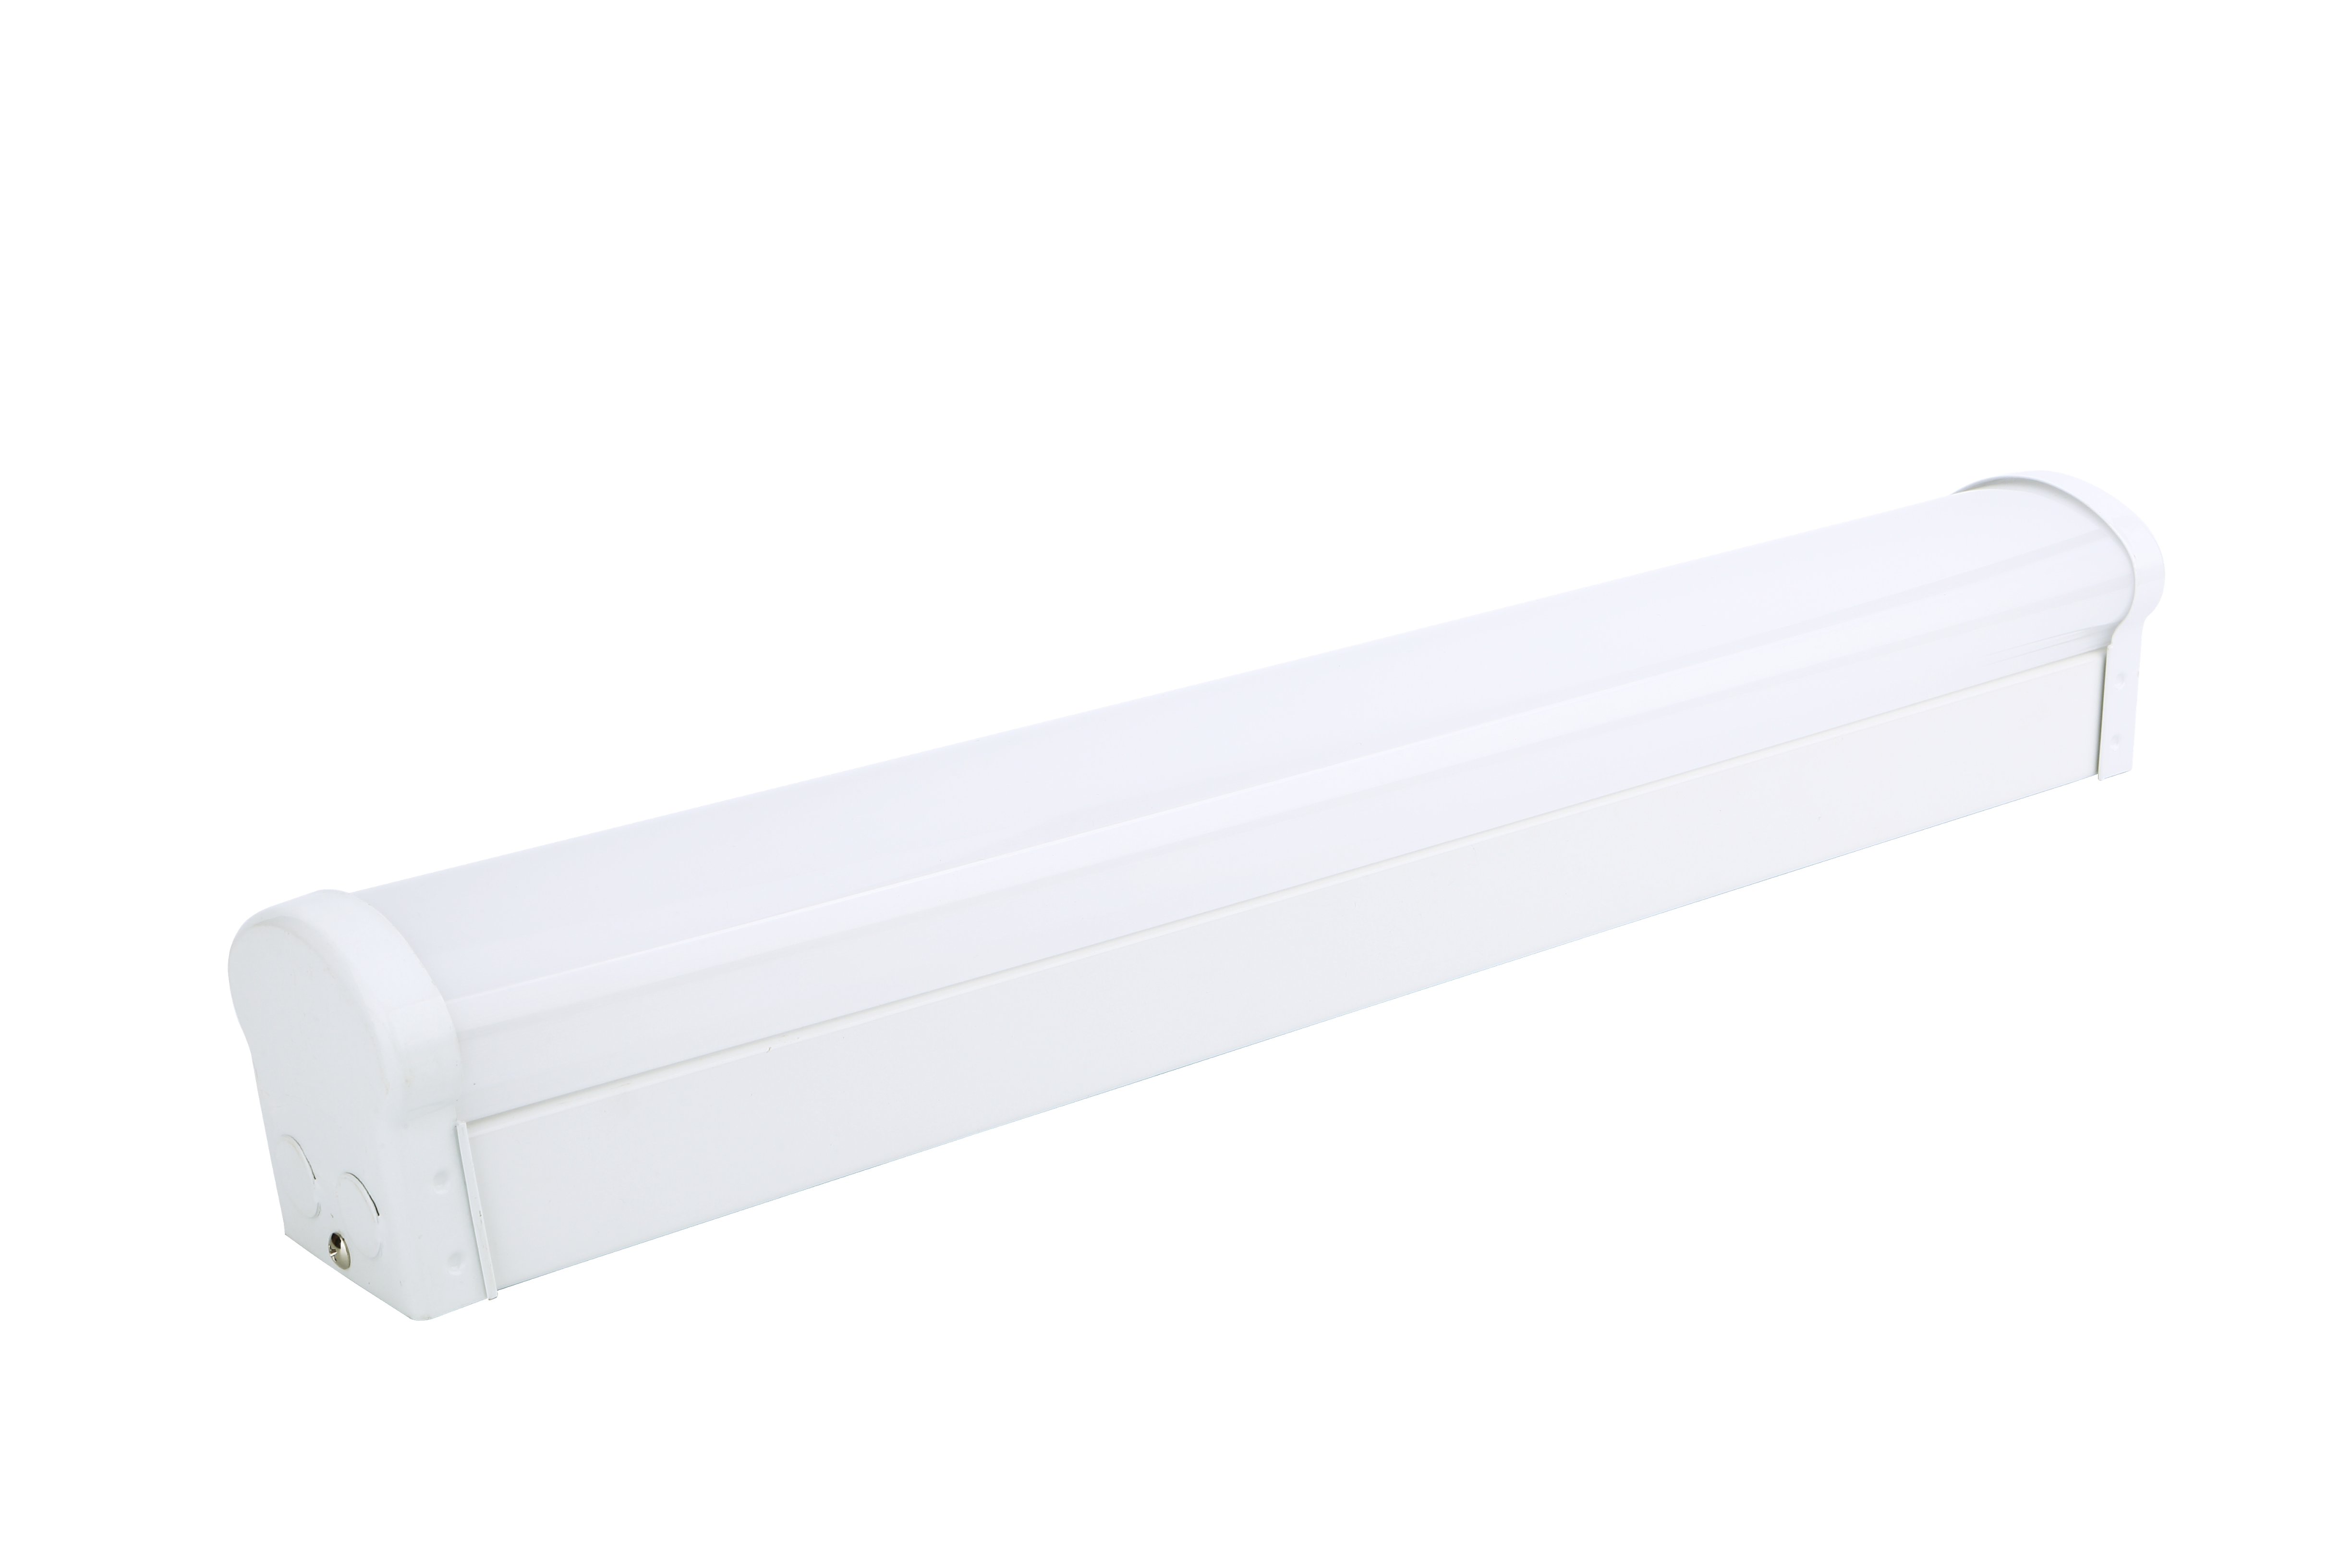 8FT LED Cover STRIP FIXTURE 65W - 7800 LUMENS UL & DLC Listed - 5 YEAR WARRANTY